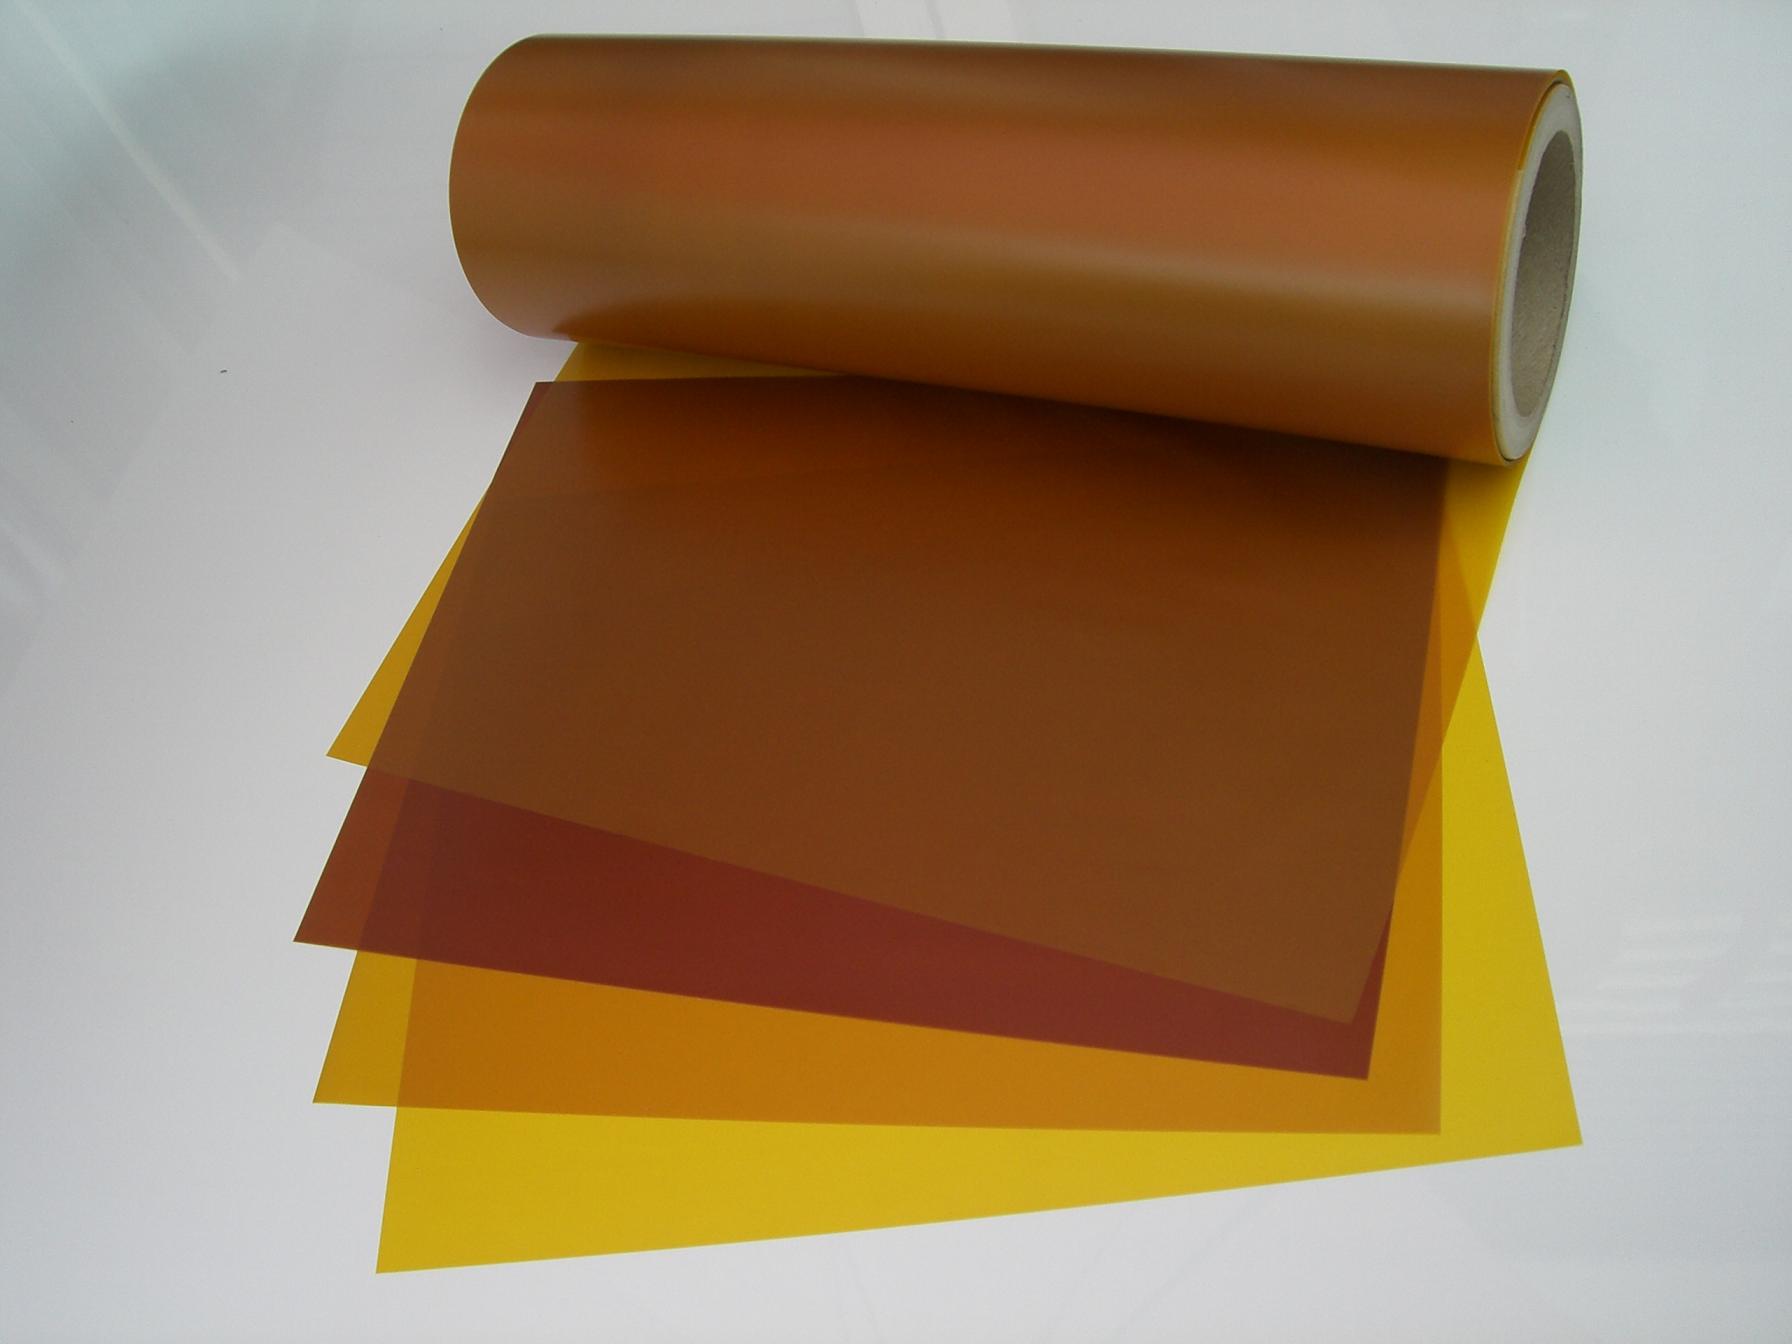 5 Mil (.005" thick) General-Purpose Polyimide Film HN 180°C, amber, custom rolls and sheets based on your specification